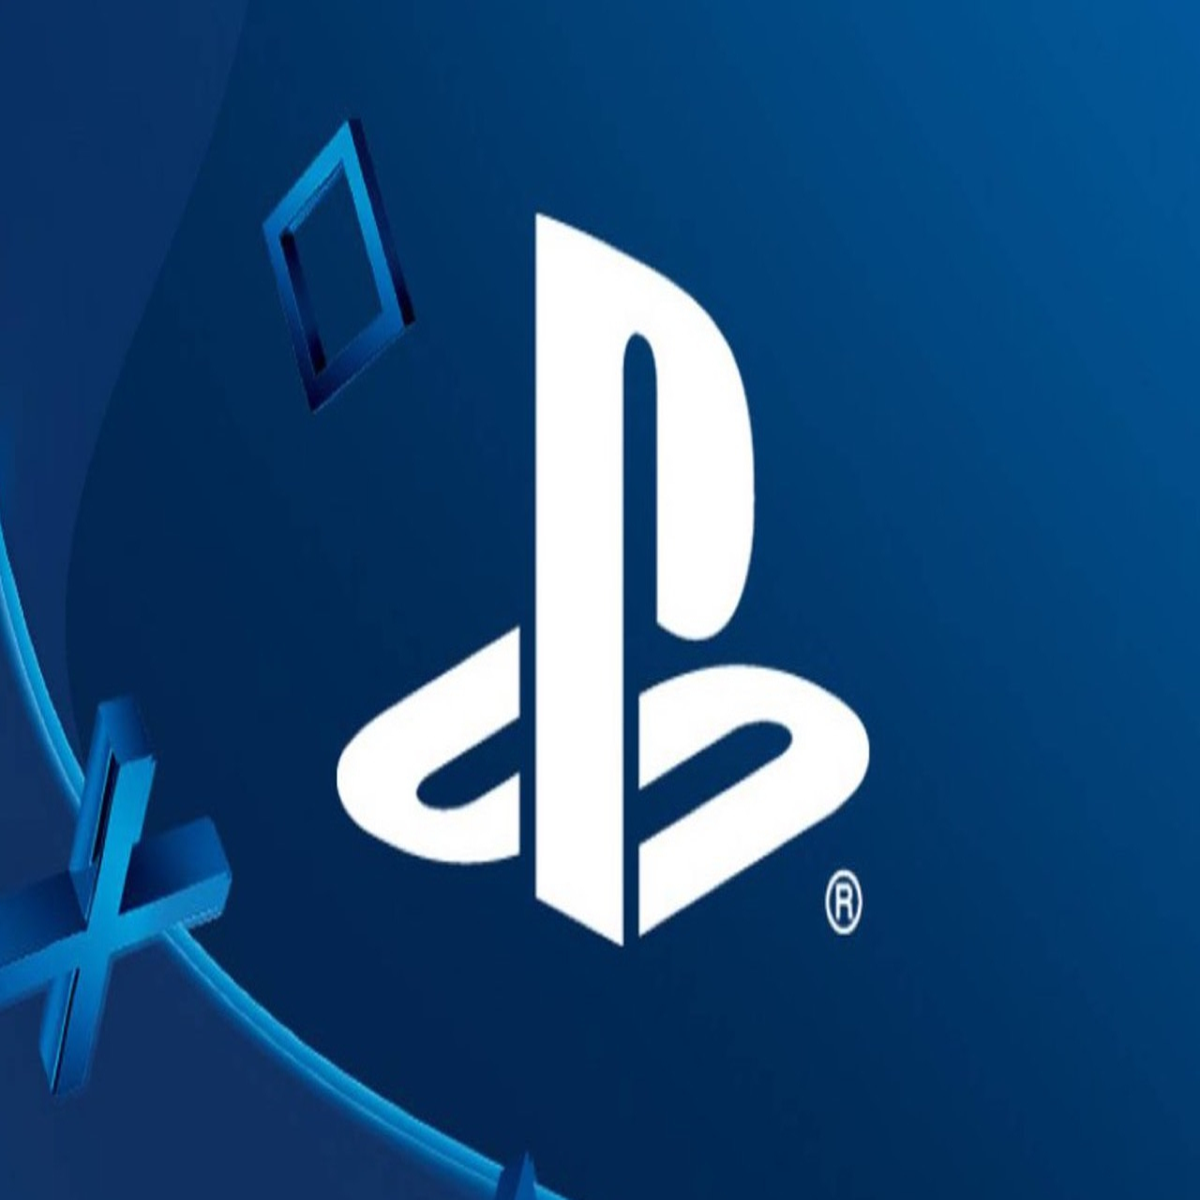 Free Online Multiplayer Weekend From Dec 18 to Dec 19. Play Online Without  PS Plus. : r/PlayStationPlus